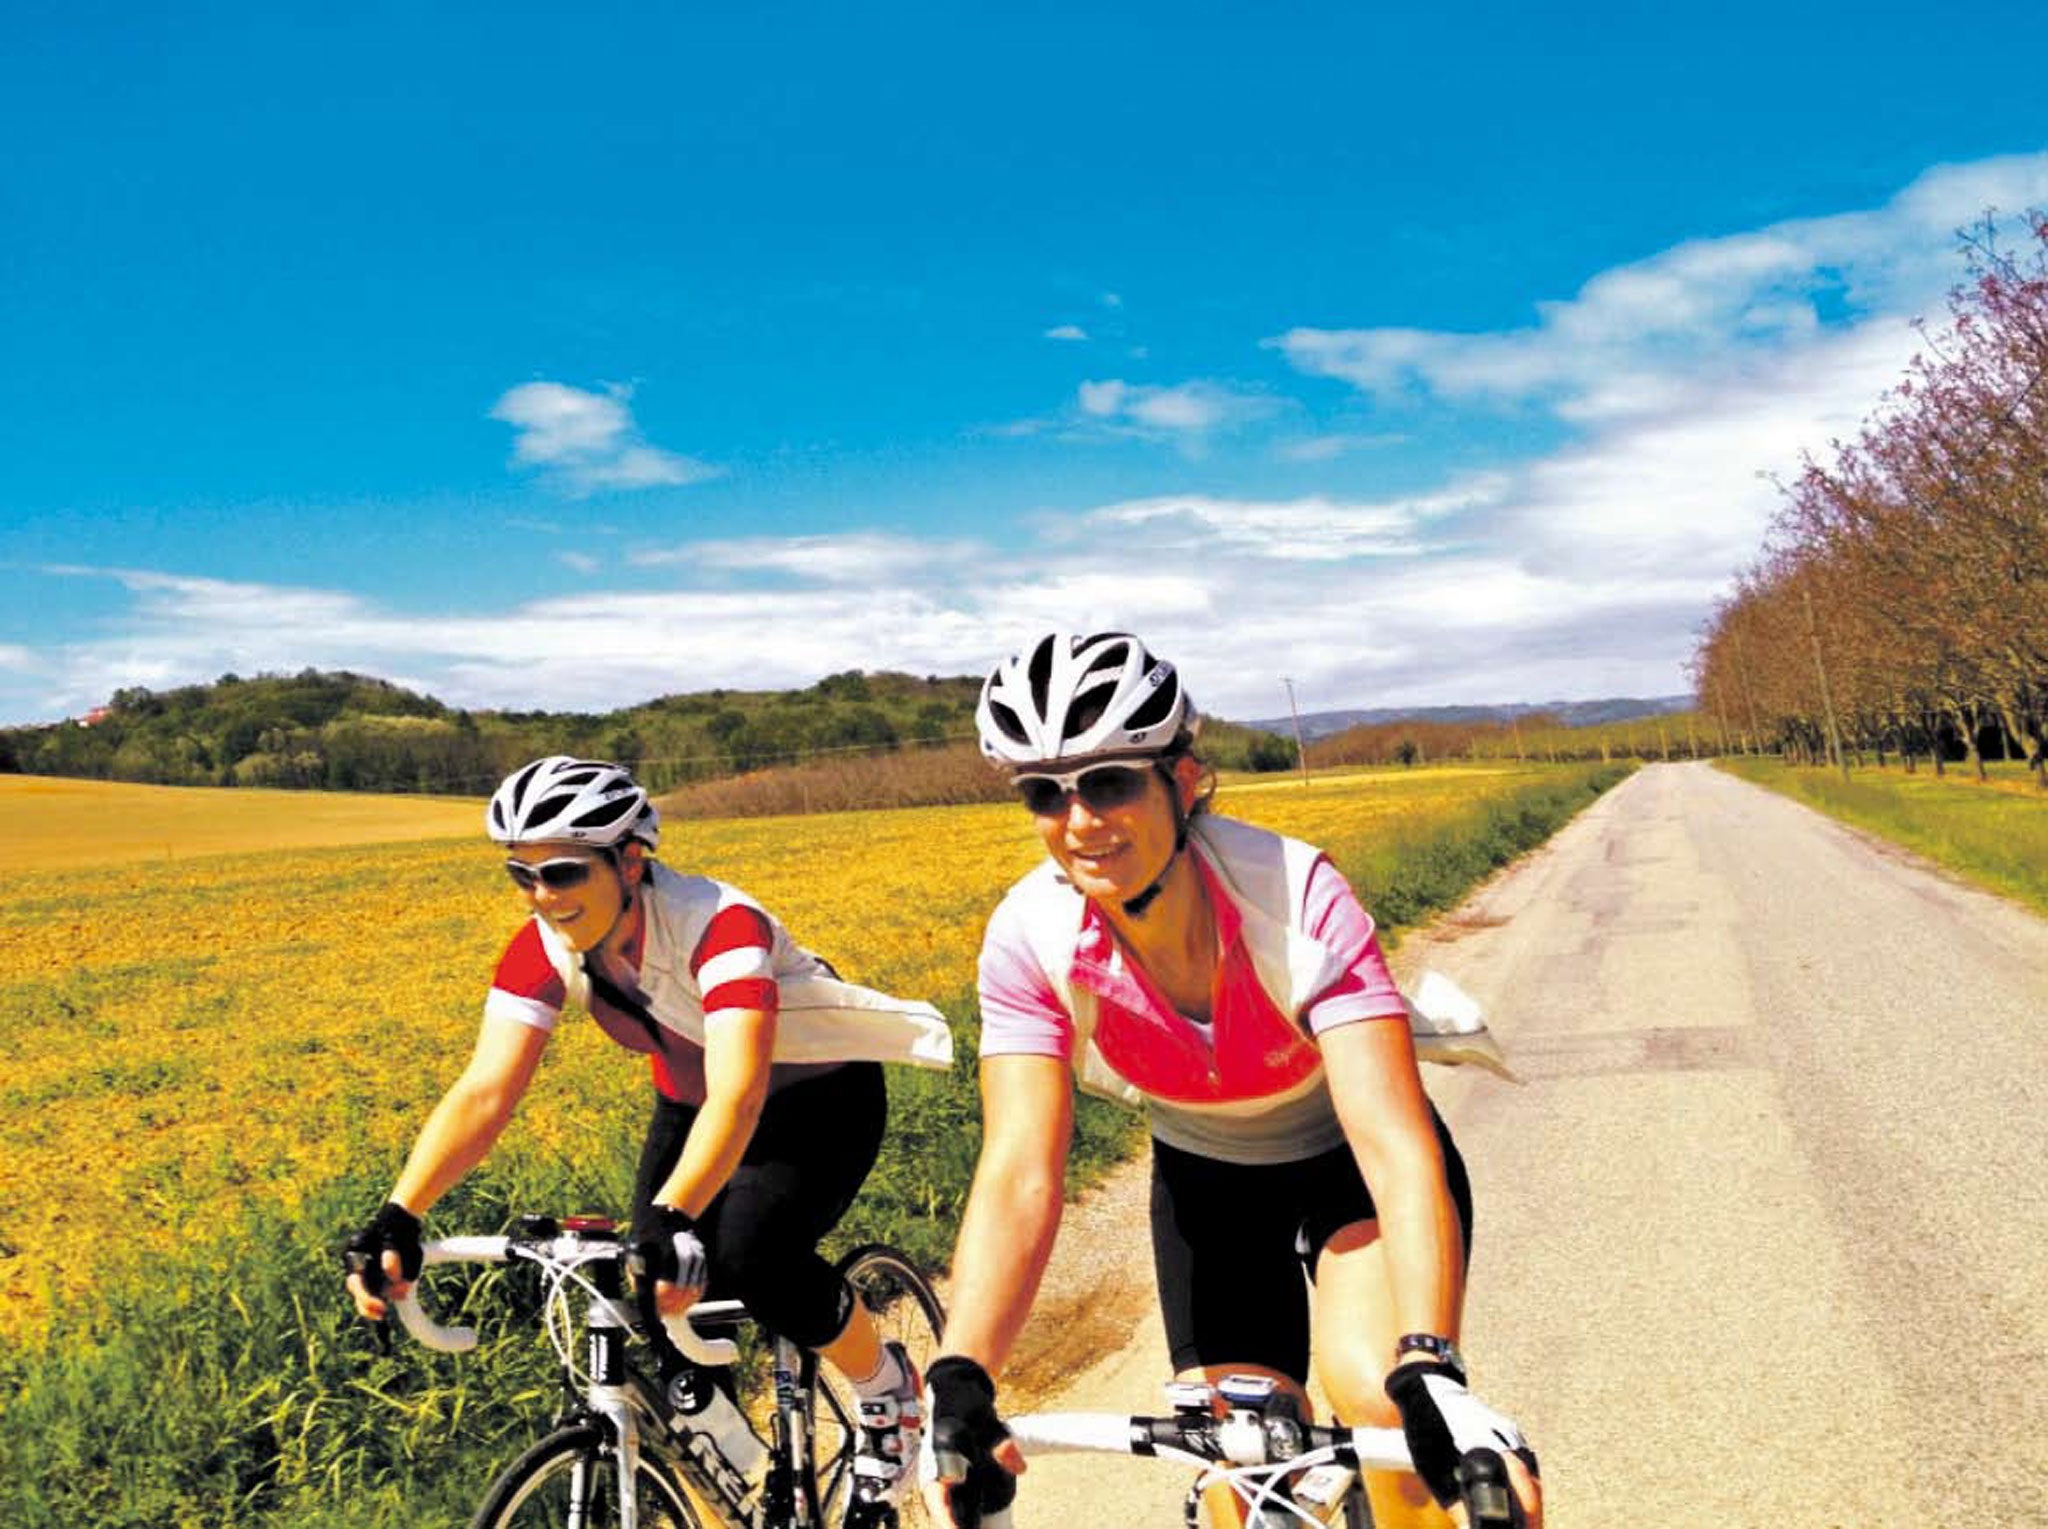 Cycling holidays are ideal for the active traveller